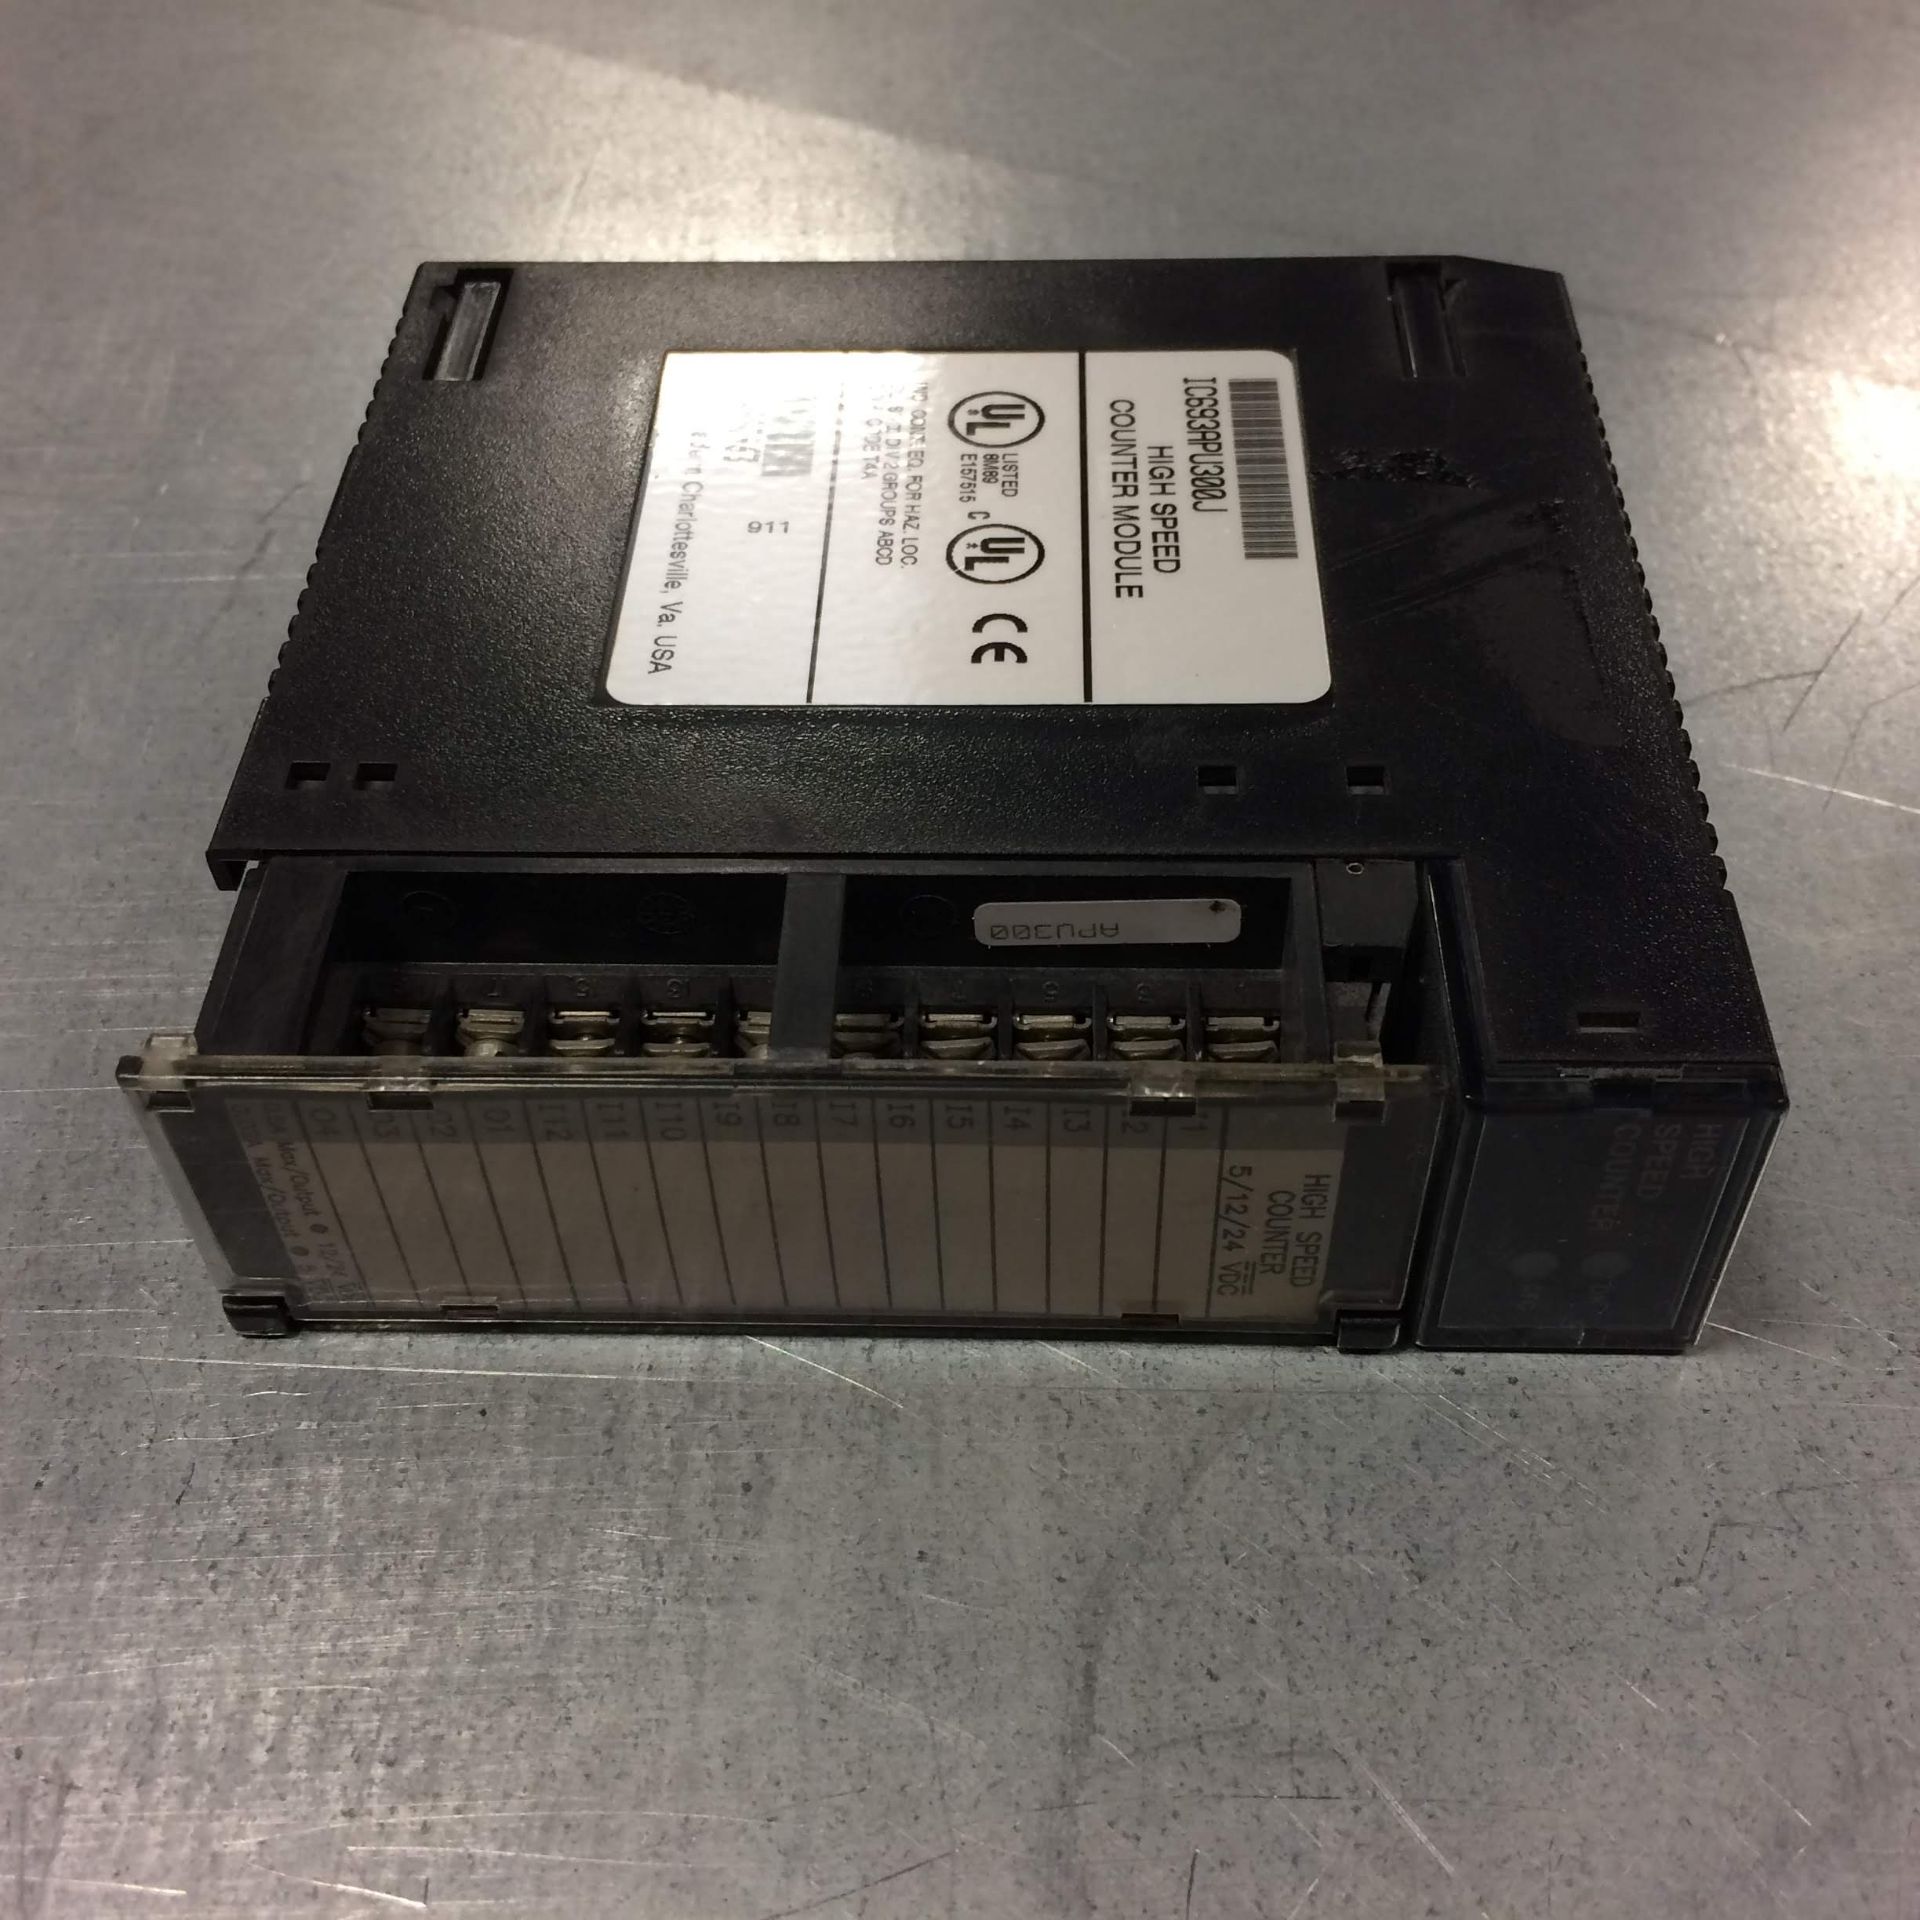 (1) IC693APU300J GE FANUC HIGH SPEED COUNTER MODULE USED. Pickup your lot(s) for free! Shipping is